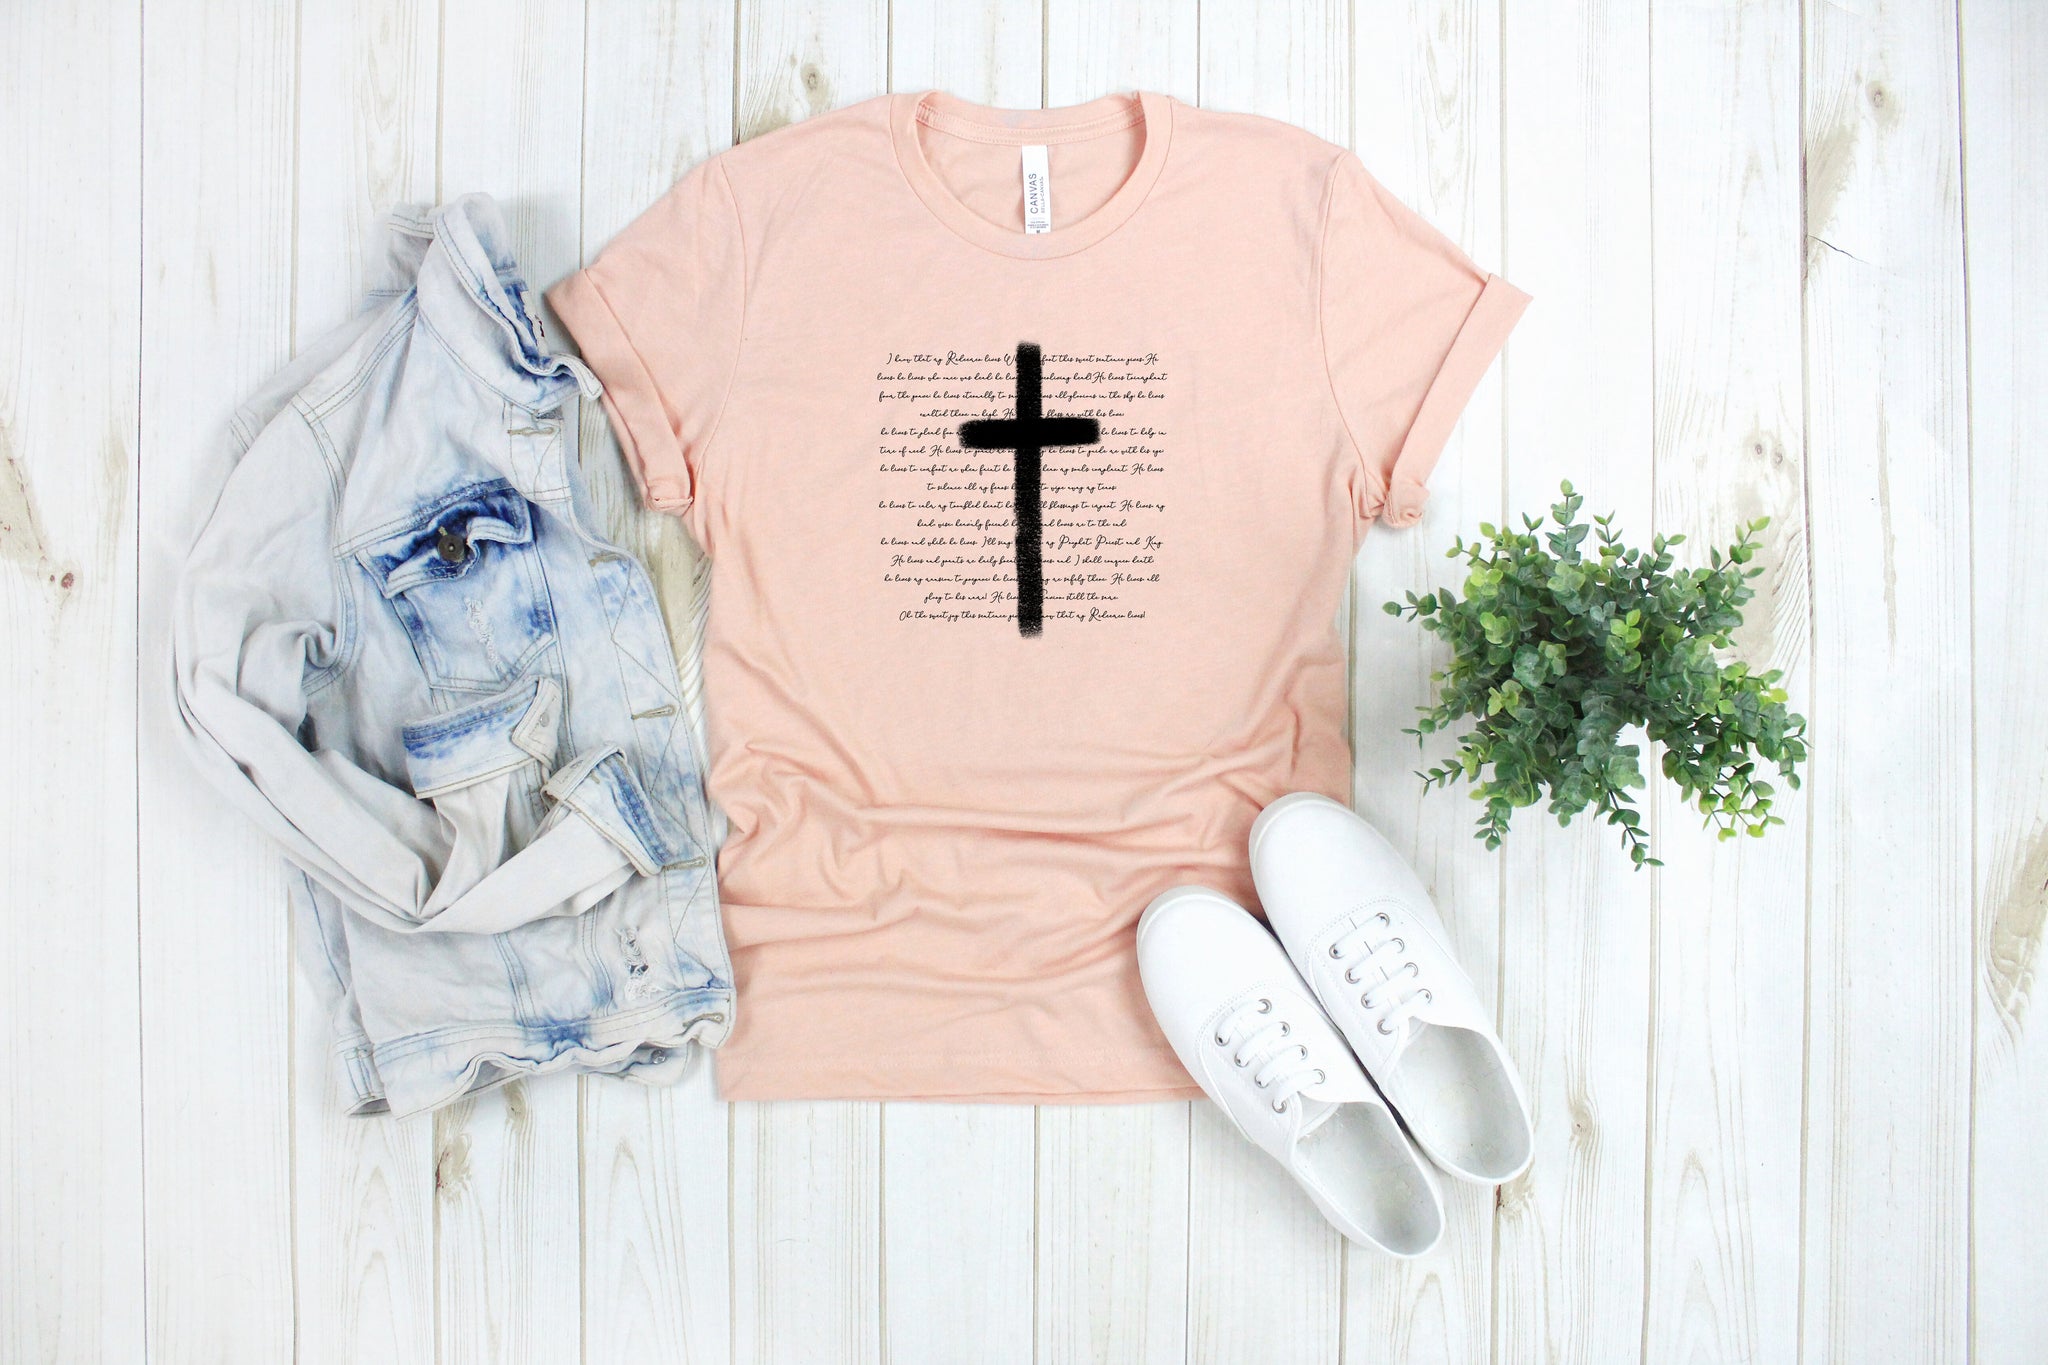 I Know the My Redeemer Lives Tee